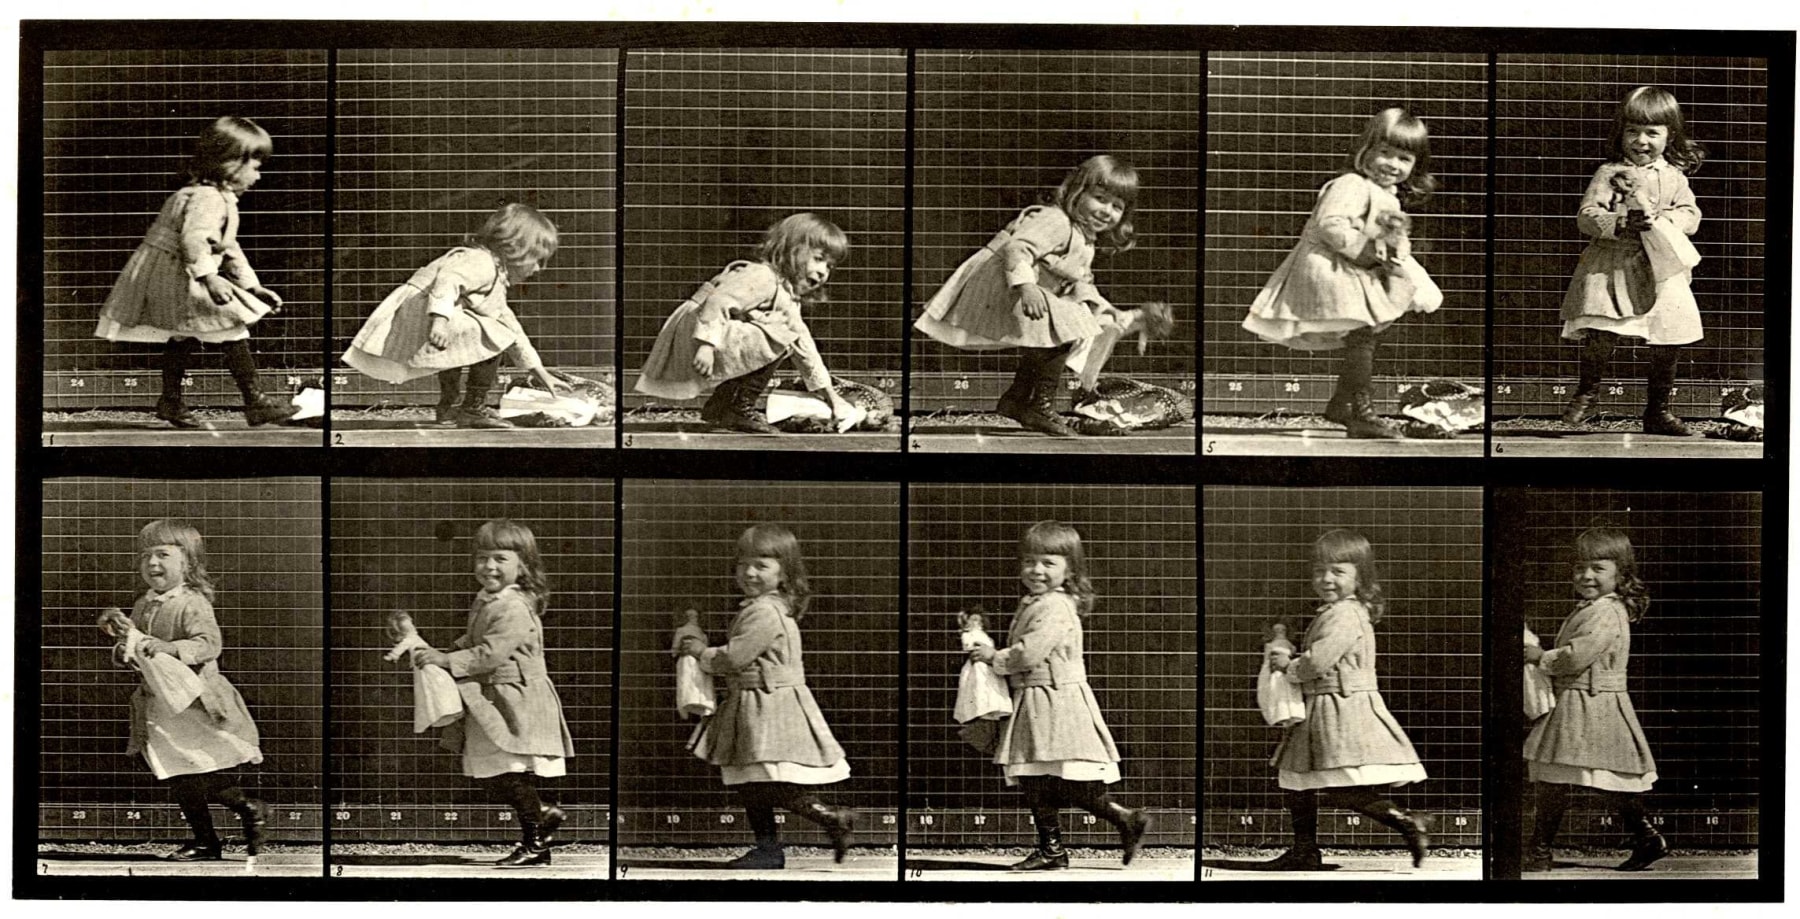 Sequence of black and white photos showing the movements of a young girl picking up a doll